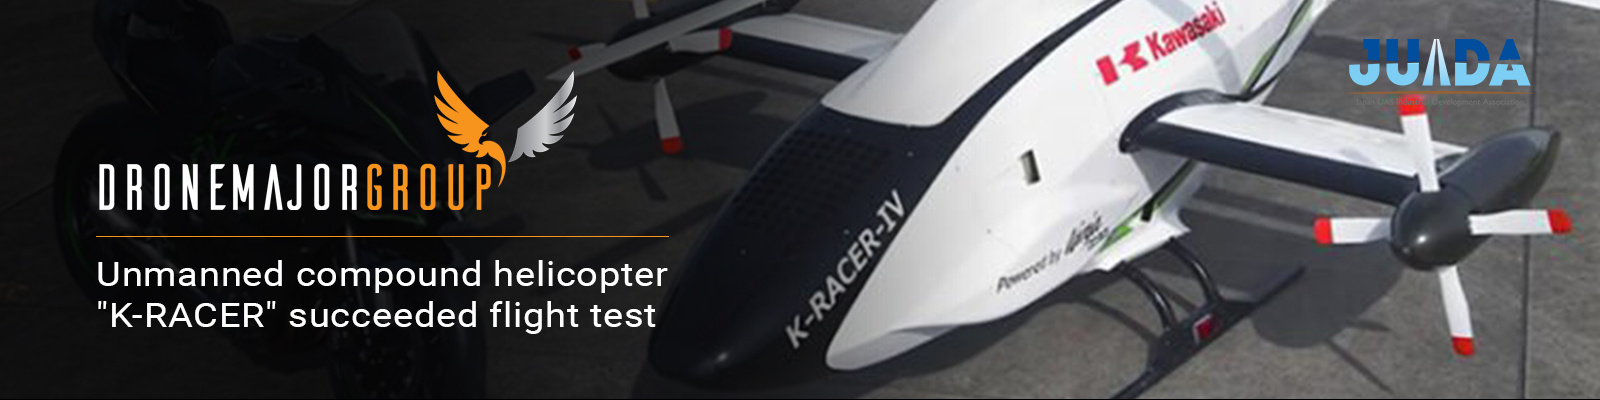 Kawasaki Heavy Industries succeeded in flight test of unmanned compound helicopter "K-RACER"